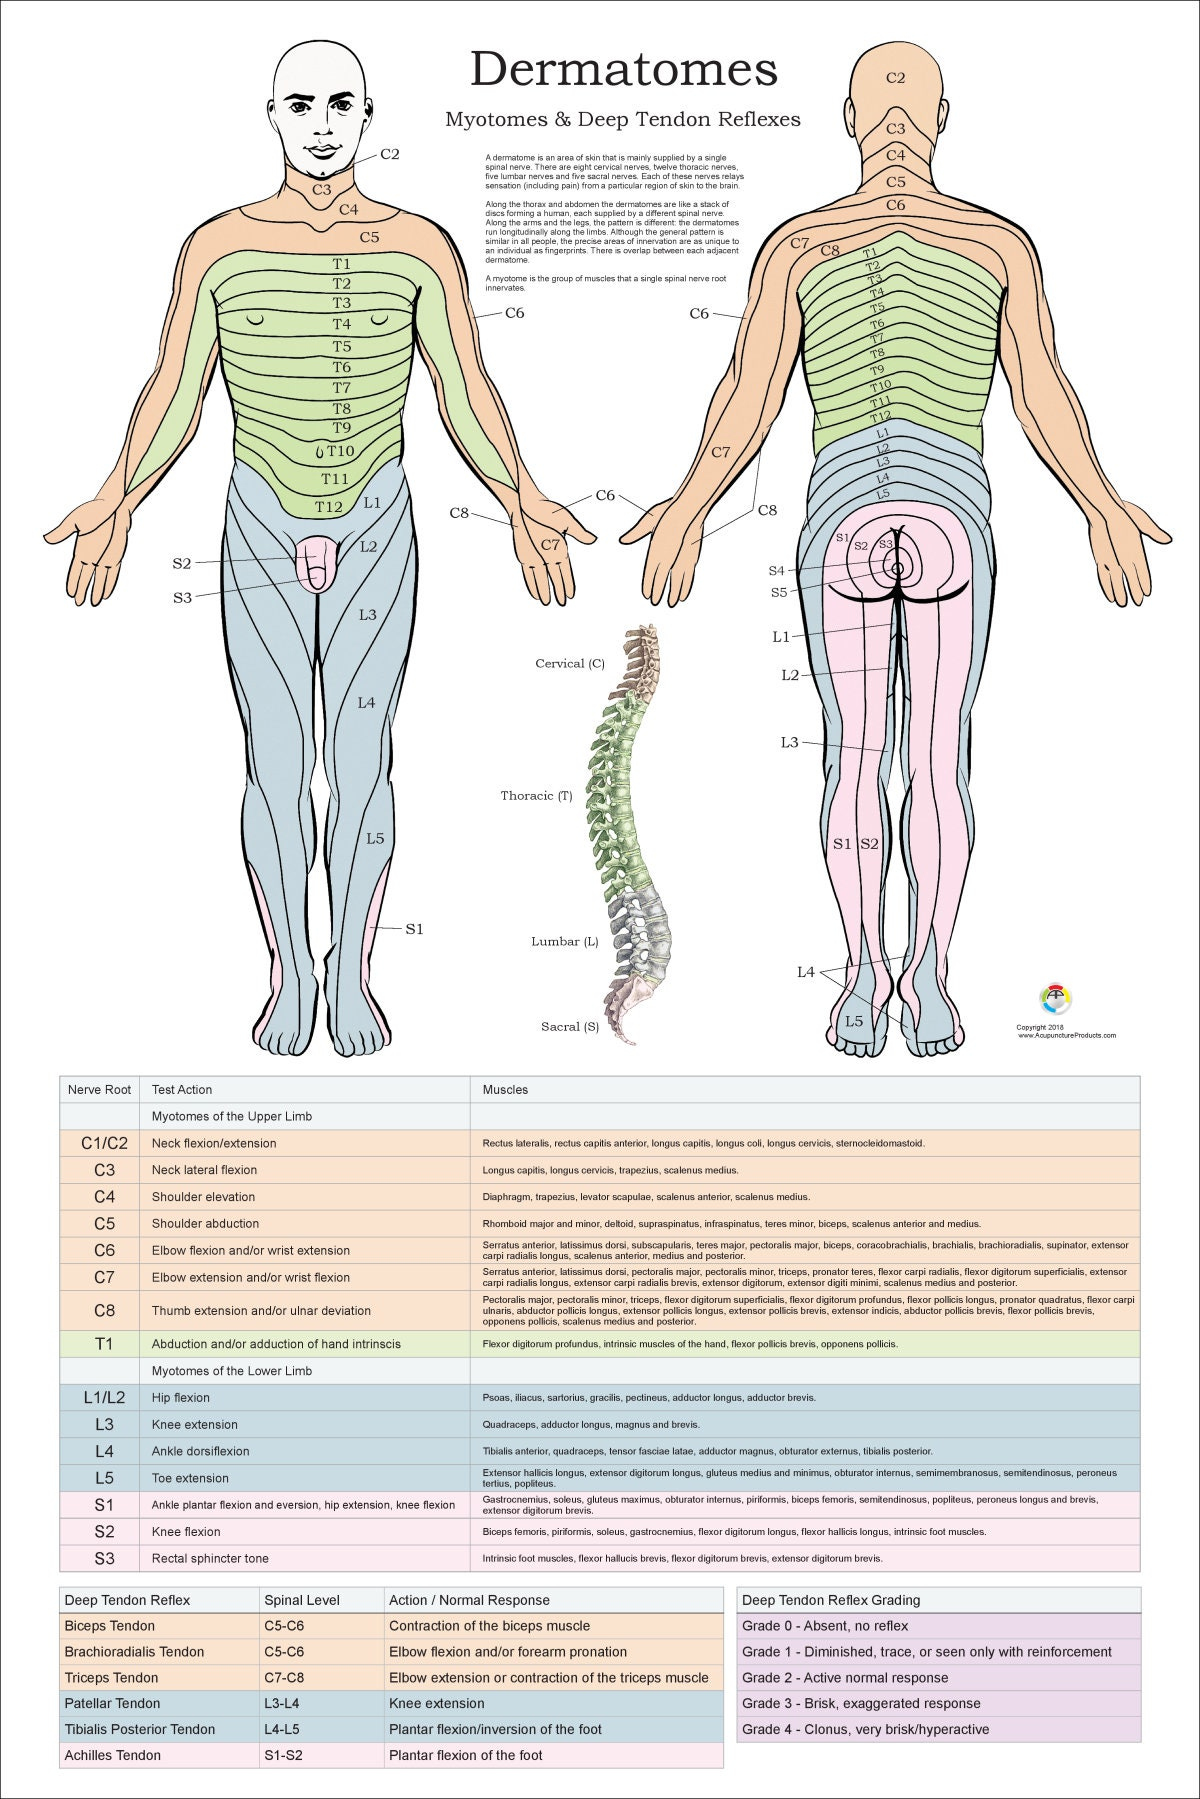 Dermatomes Myotomes And DTR Poster 24 X 36 Chiropractic Etsy